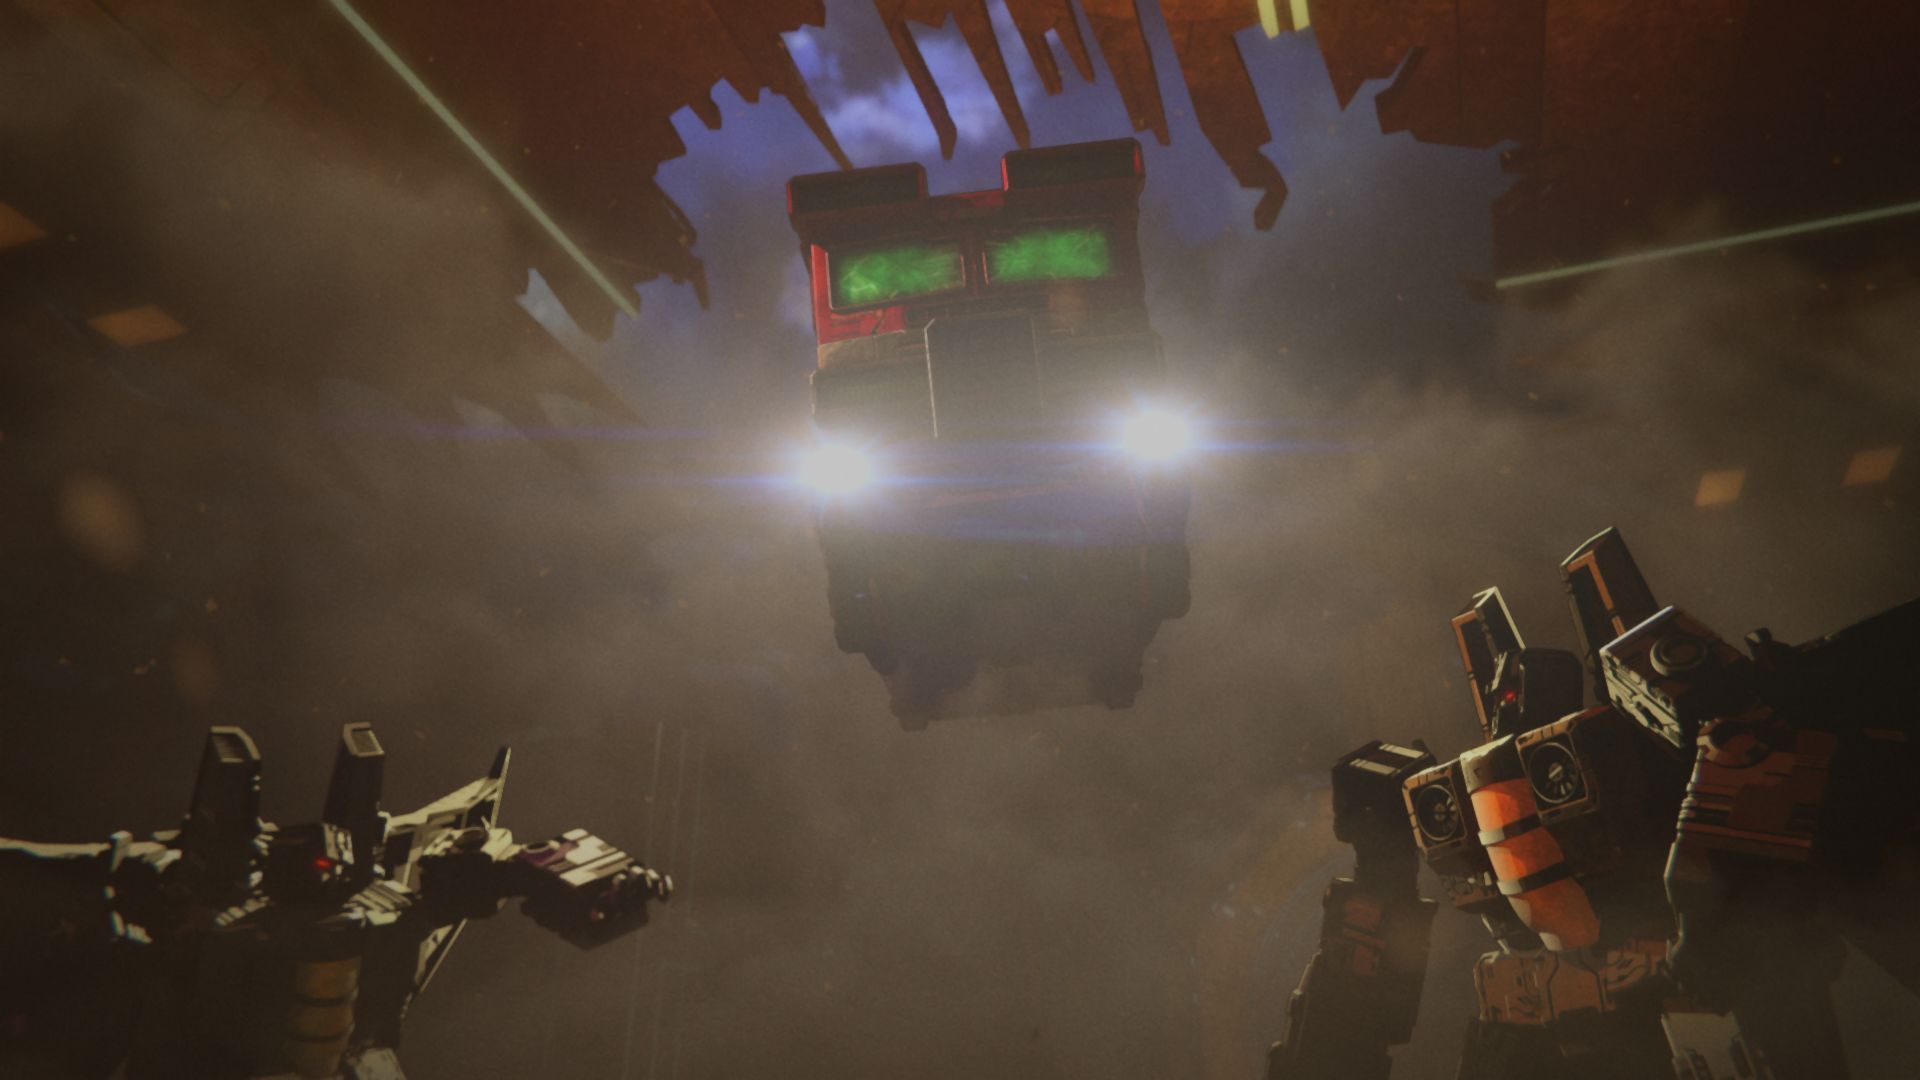 Transformers:War for Cybertron review: More than meets